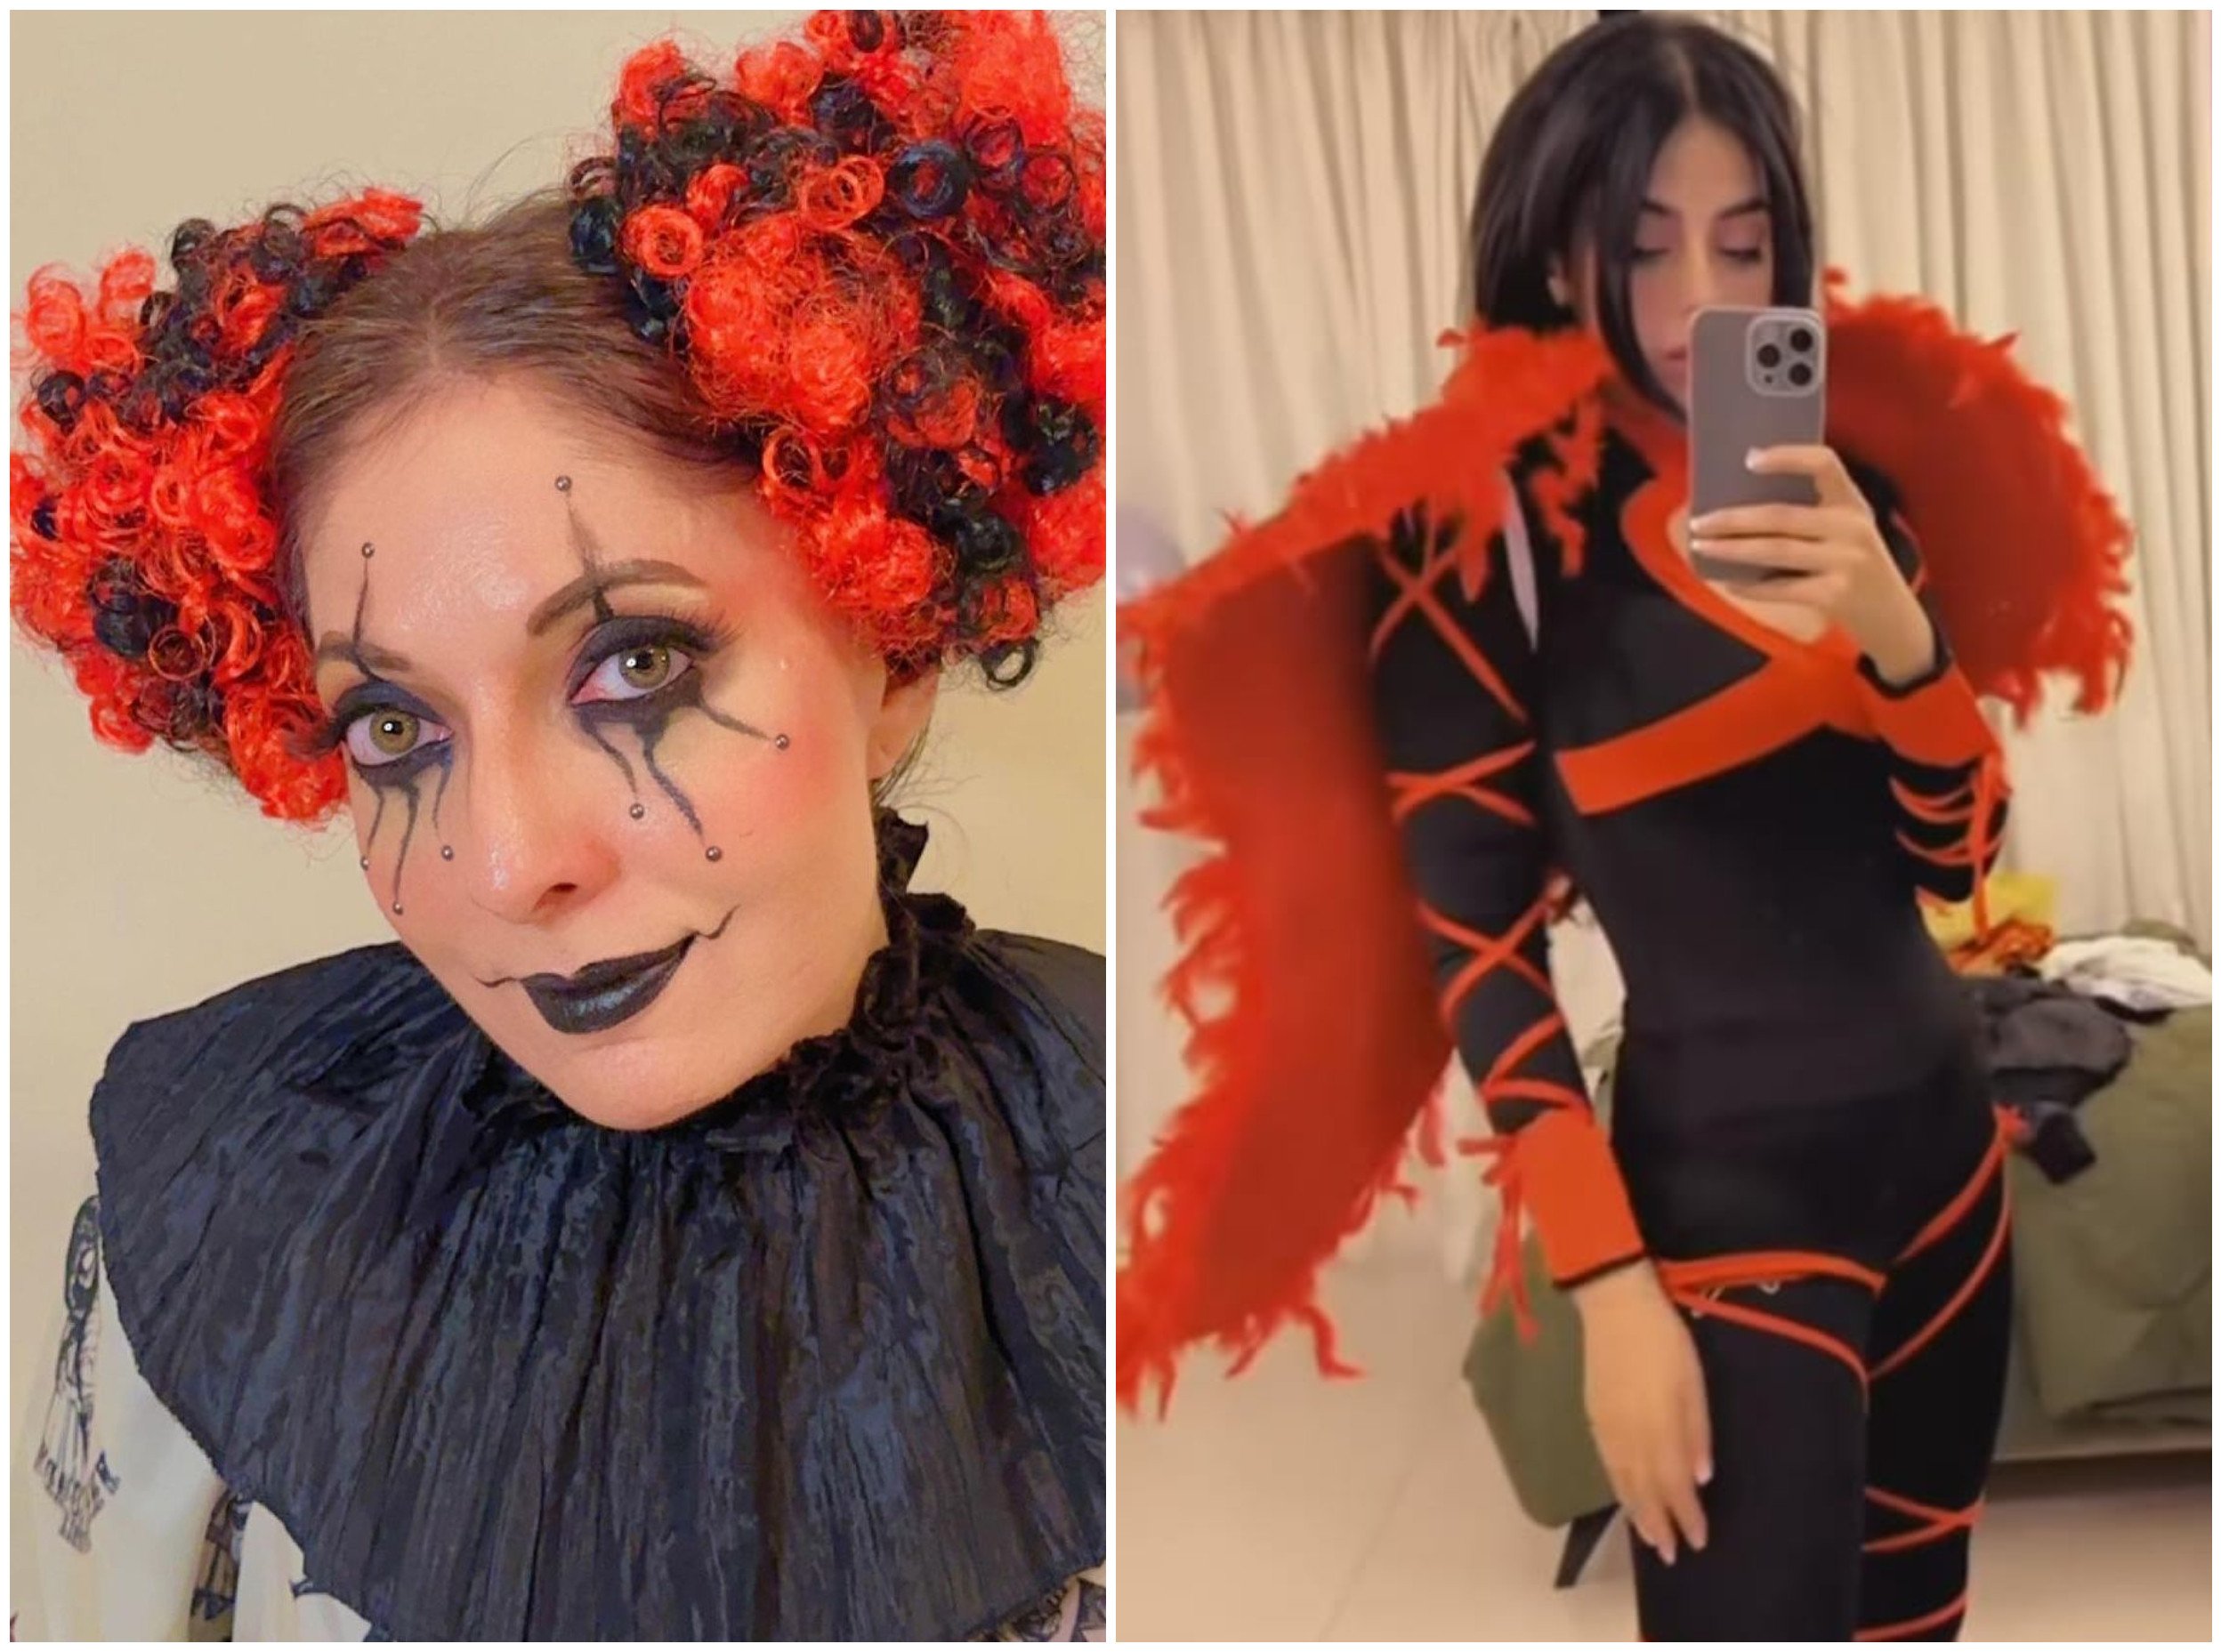 "Courageous Costume Choices: Sharmila Faruqui and Yashma Gill Embrace Gothic Looks for Halloween"